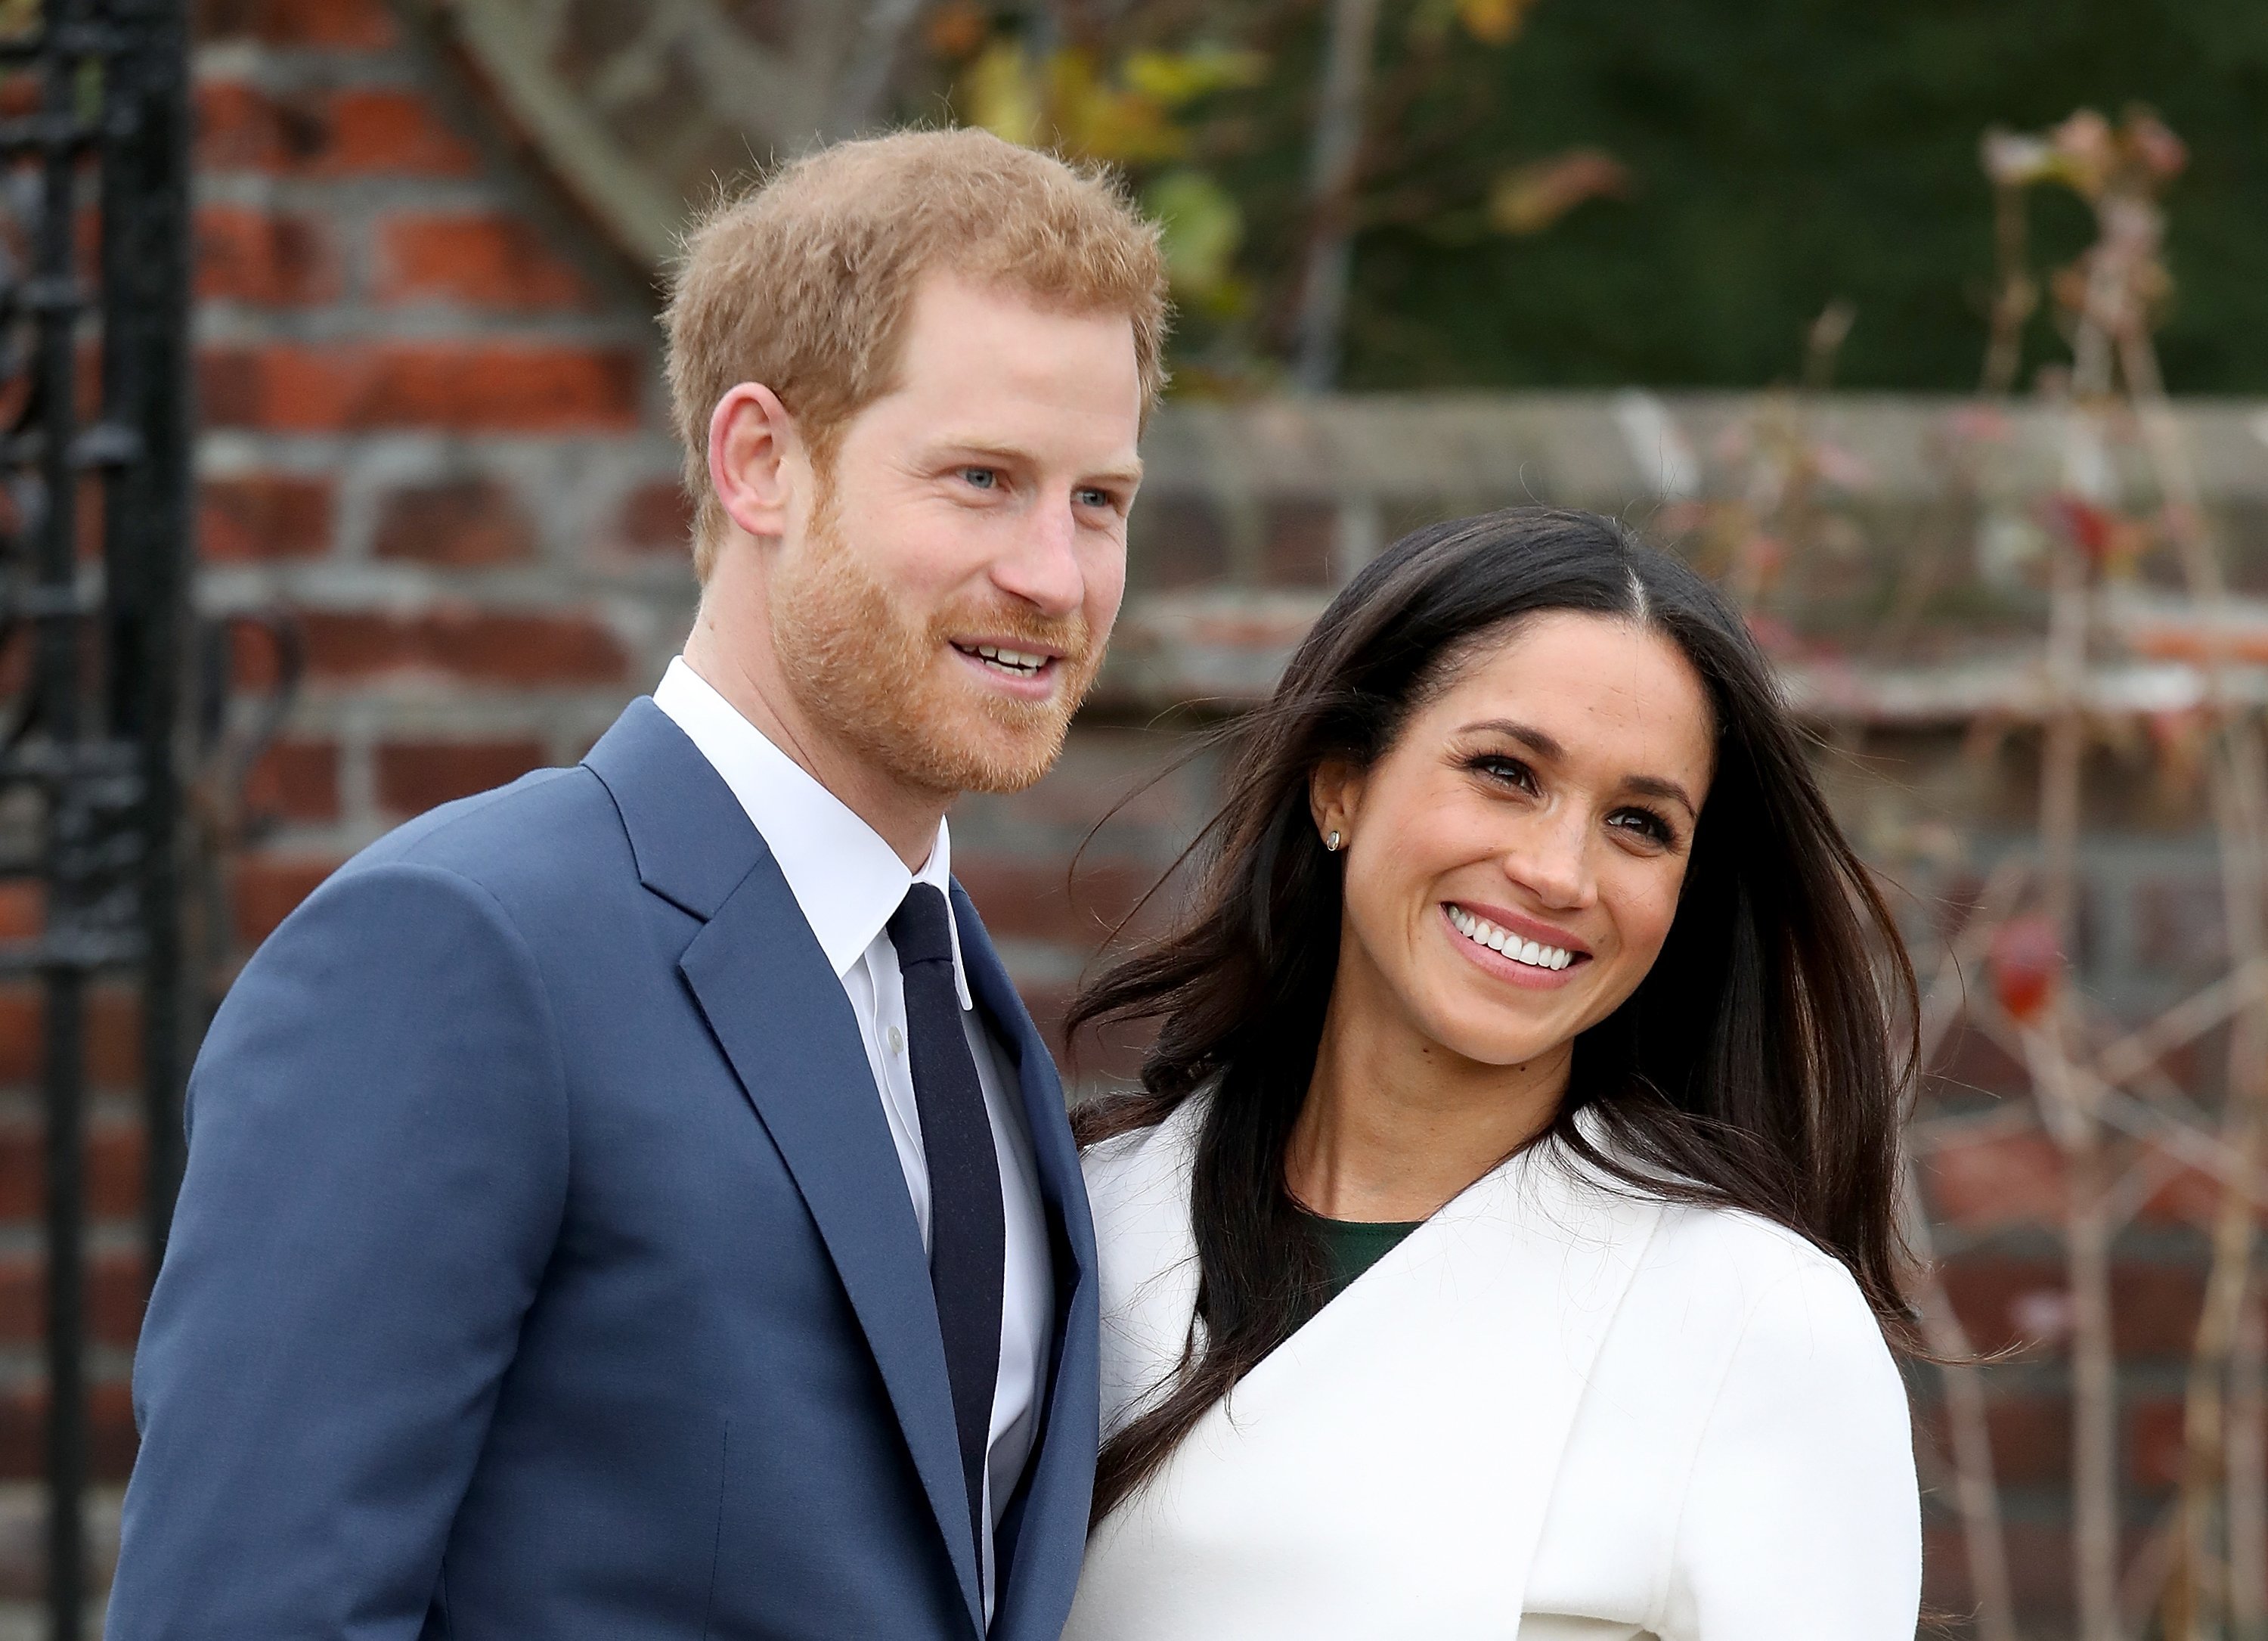 Prince Harry and Meghan Markle announce their engagement at The Sunken Gardens at Kensington Palace on November 27, 2017 | Photo: GettyImages